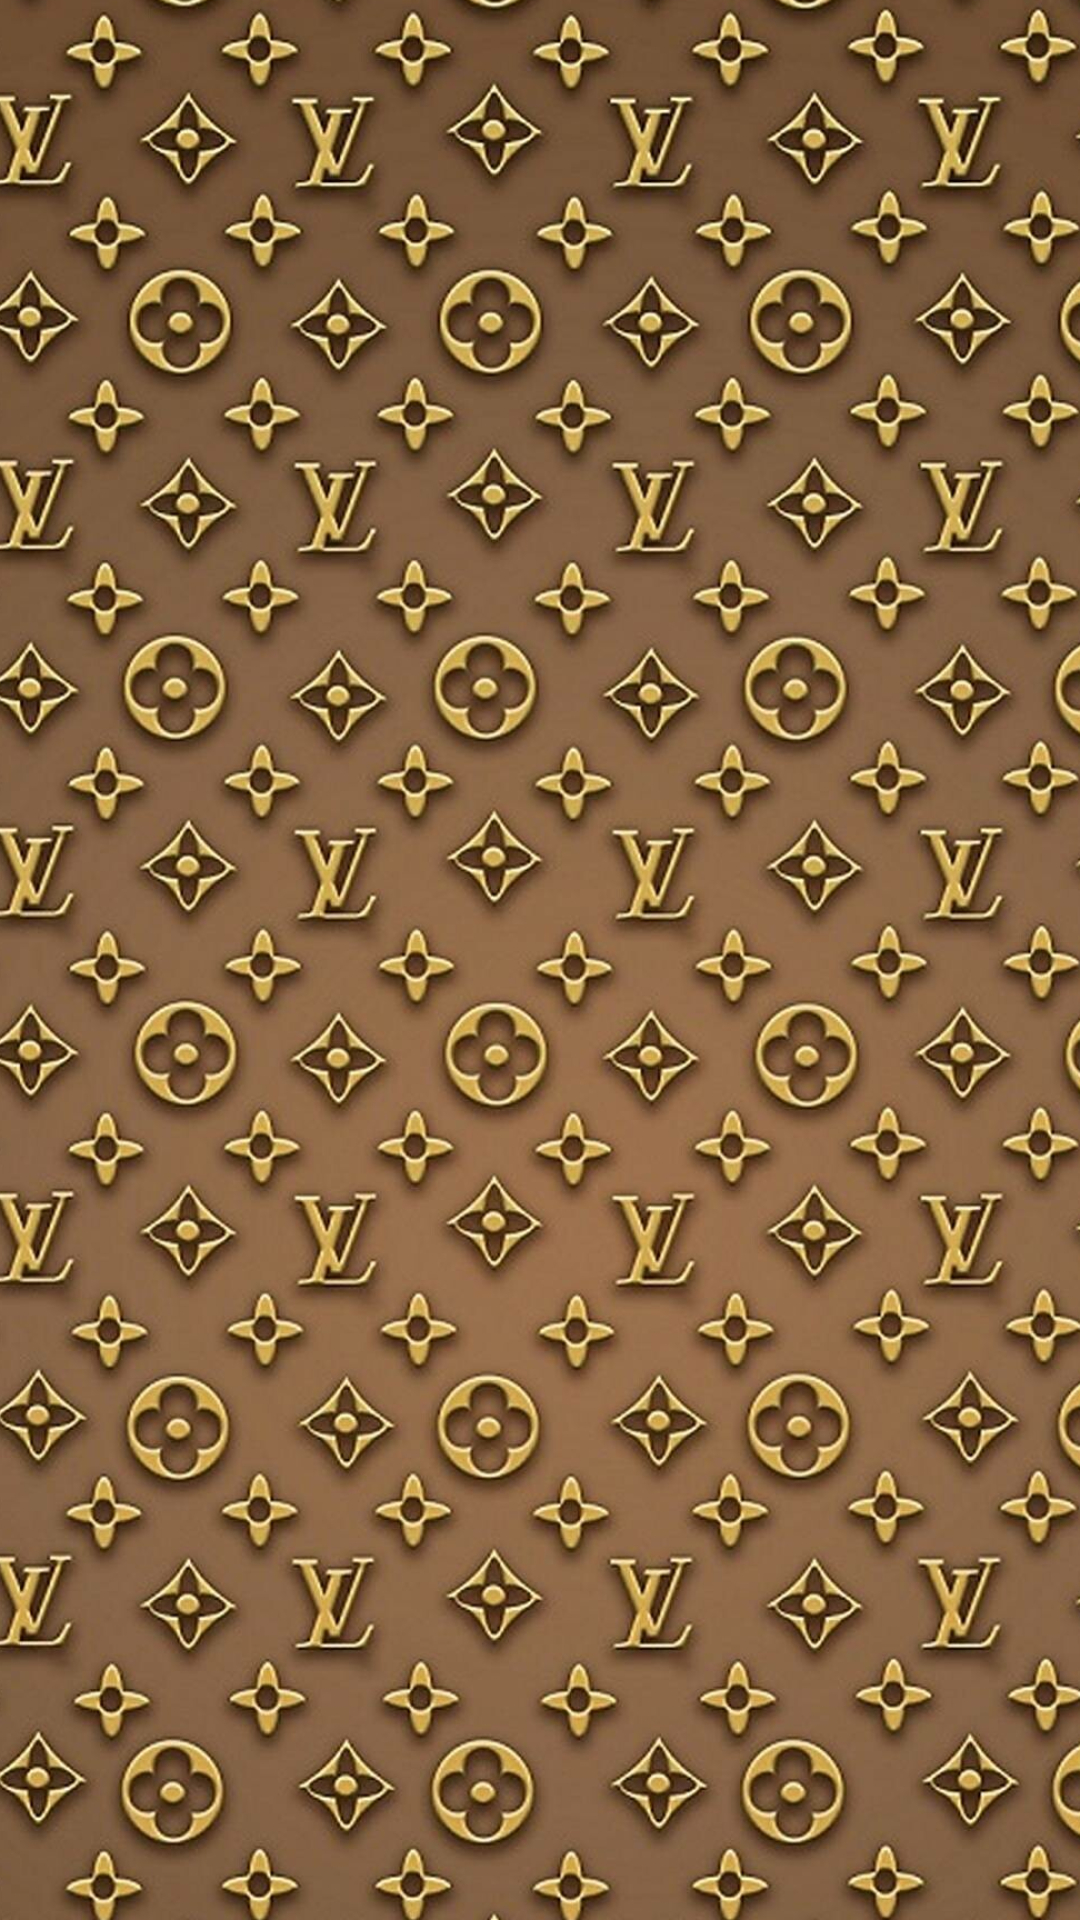 Louis Vuitton: The company acquired the Sewelo diamond on 15 January 2020. 1080x1920 Full HD Wallpaper.